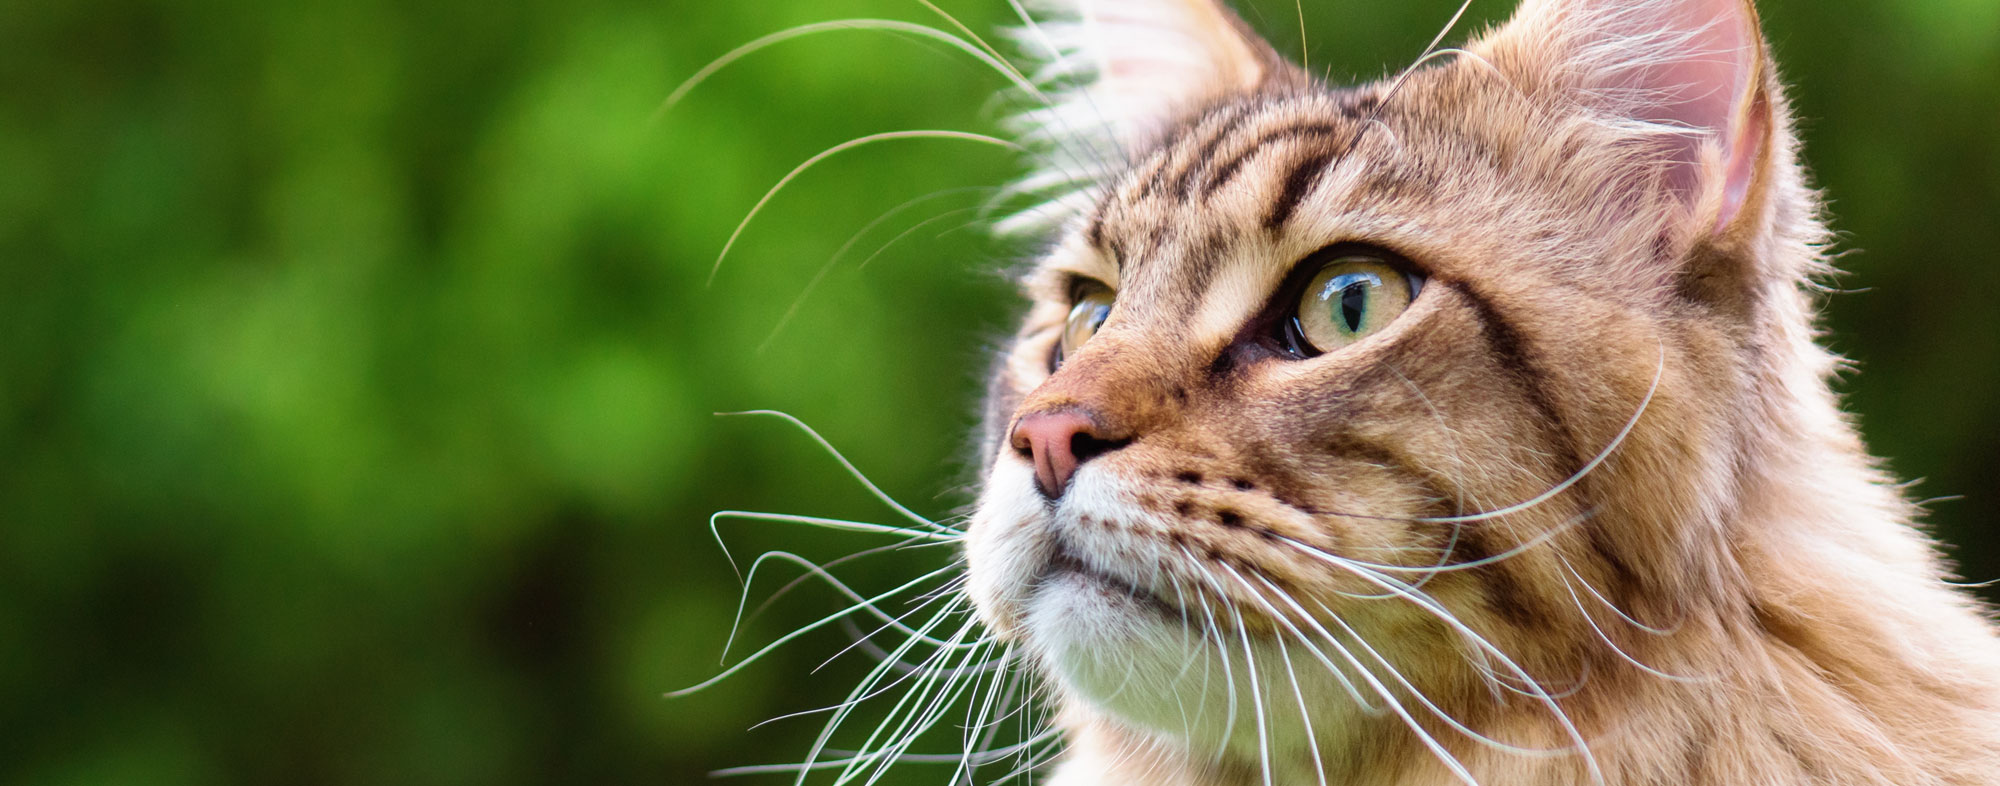 On average, the lifespan of your outdoor cat will be 4 years shorter